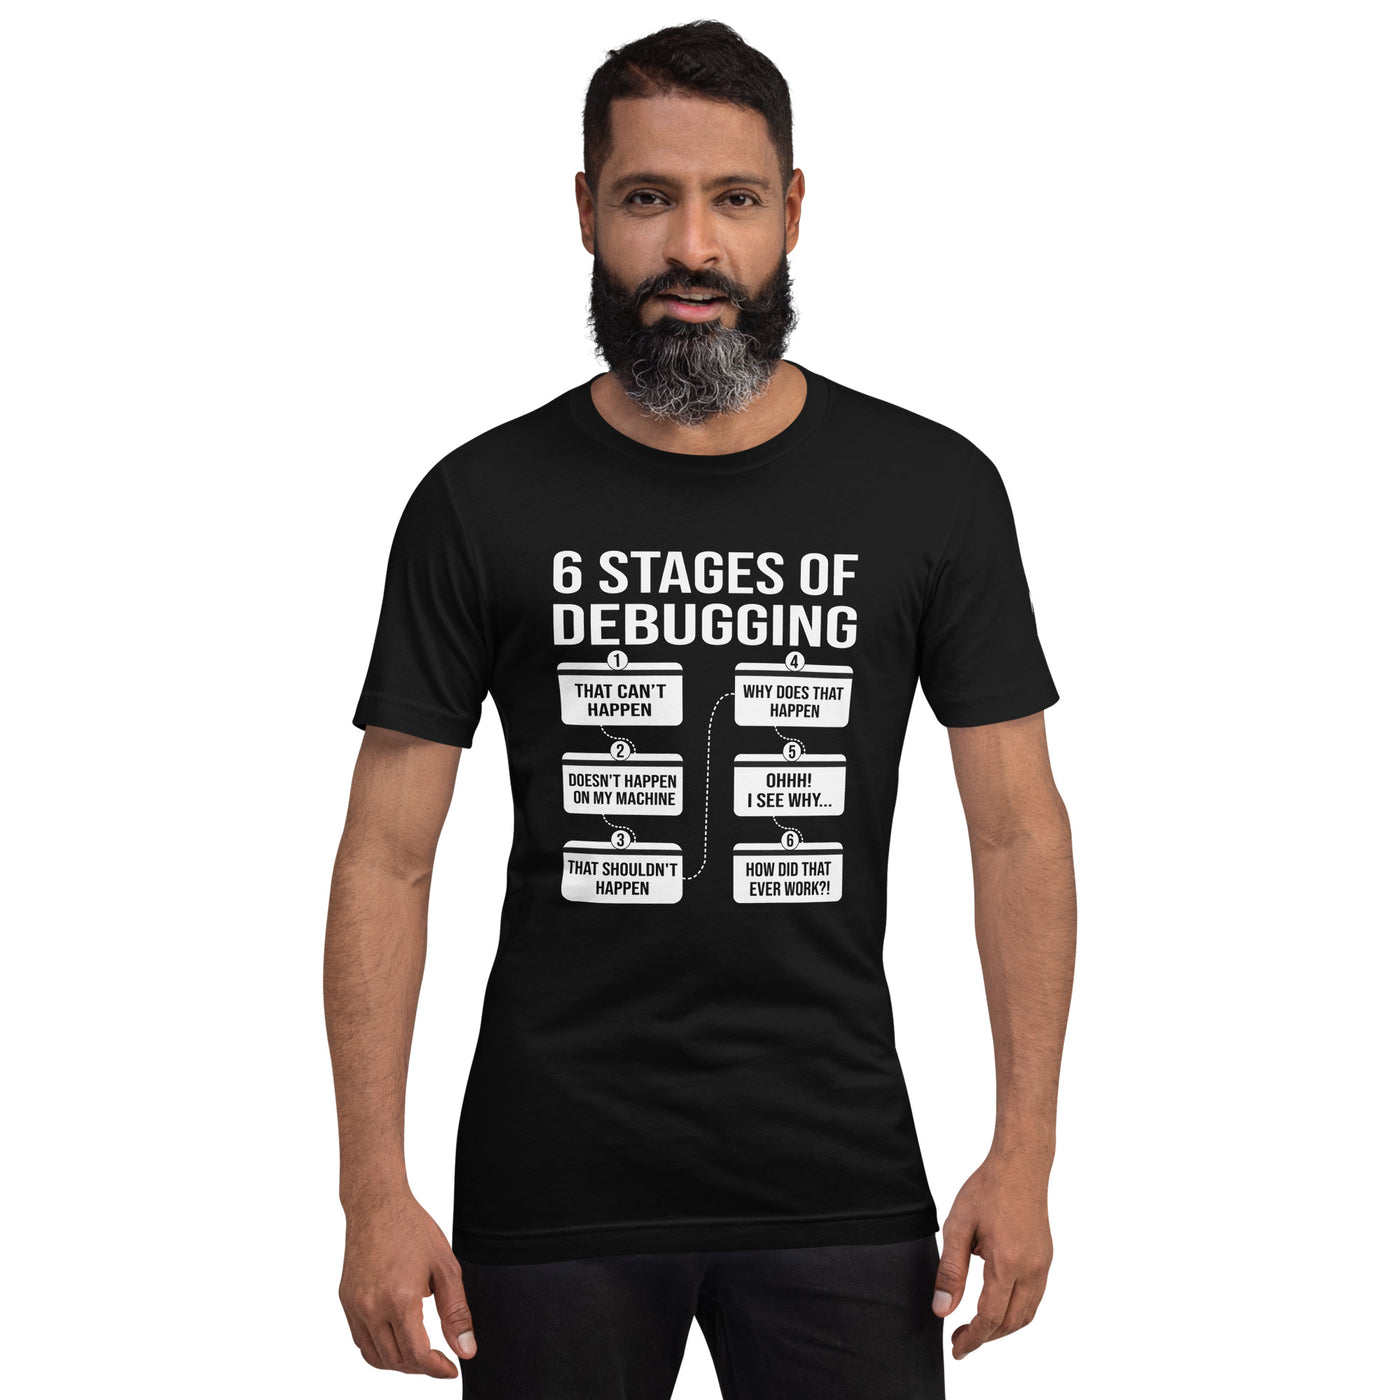 6 Stages of Debugging - Unisex t-shirt